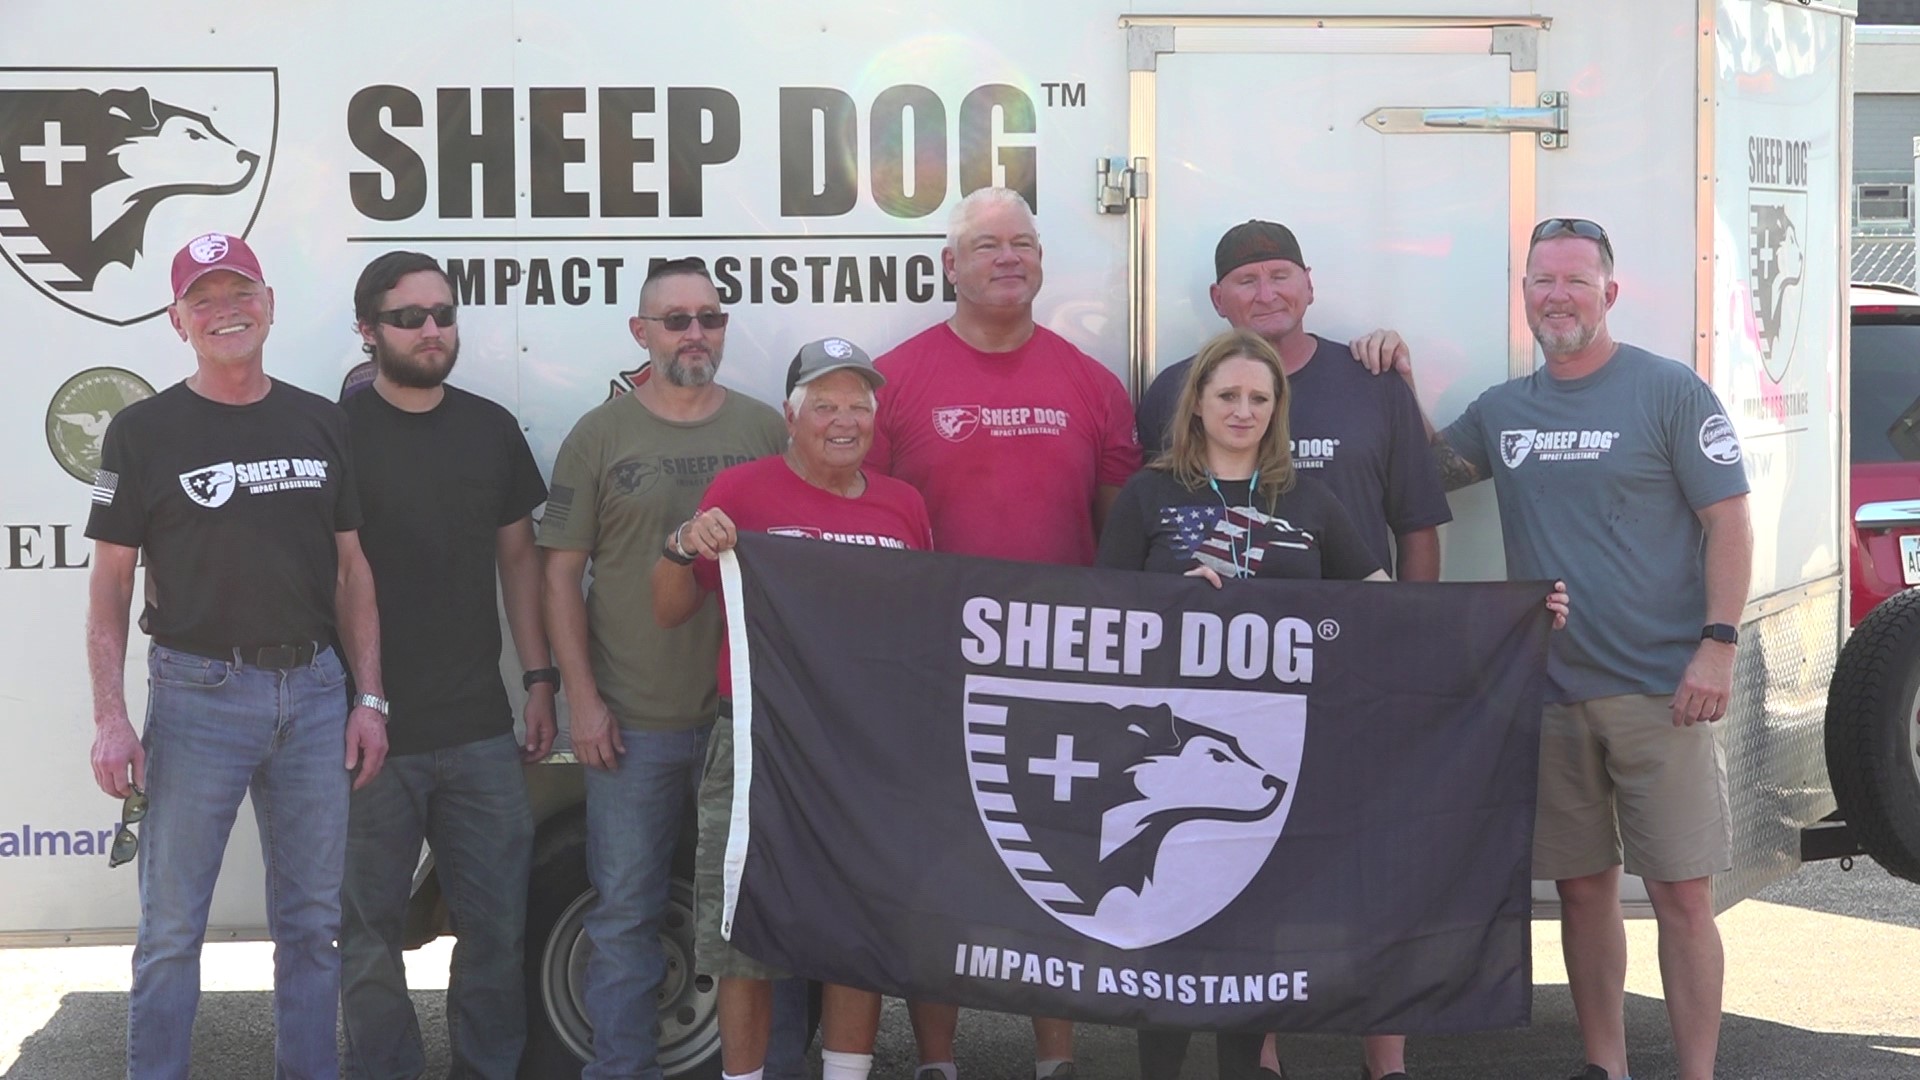 Sheep Dog Impact Assistance already has crews helping out with preparations in Florida as Hurricane Ian approaches.